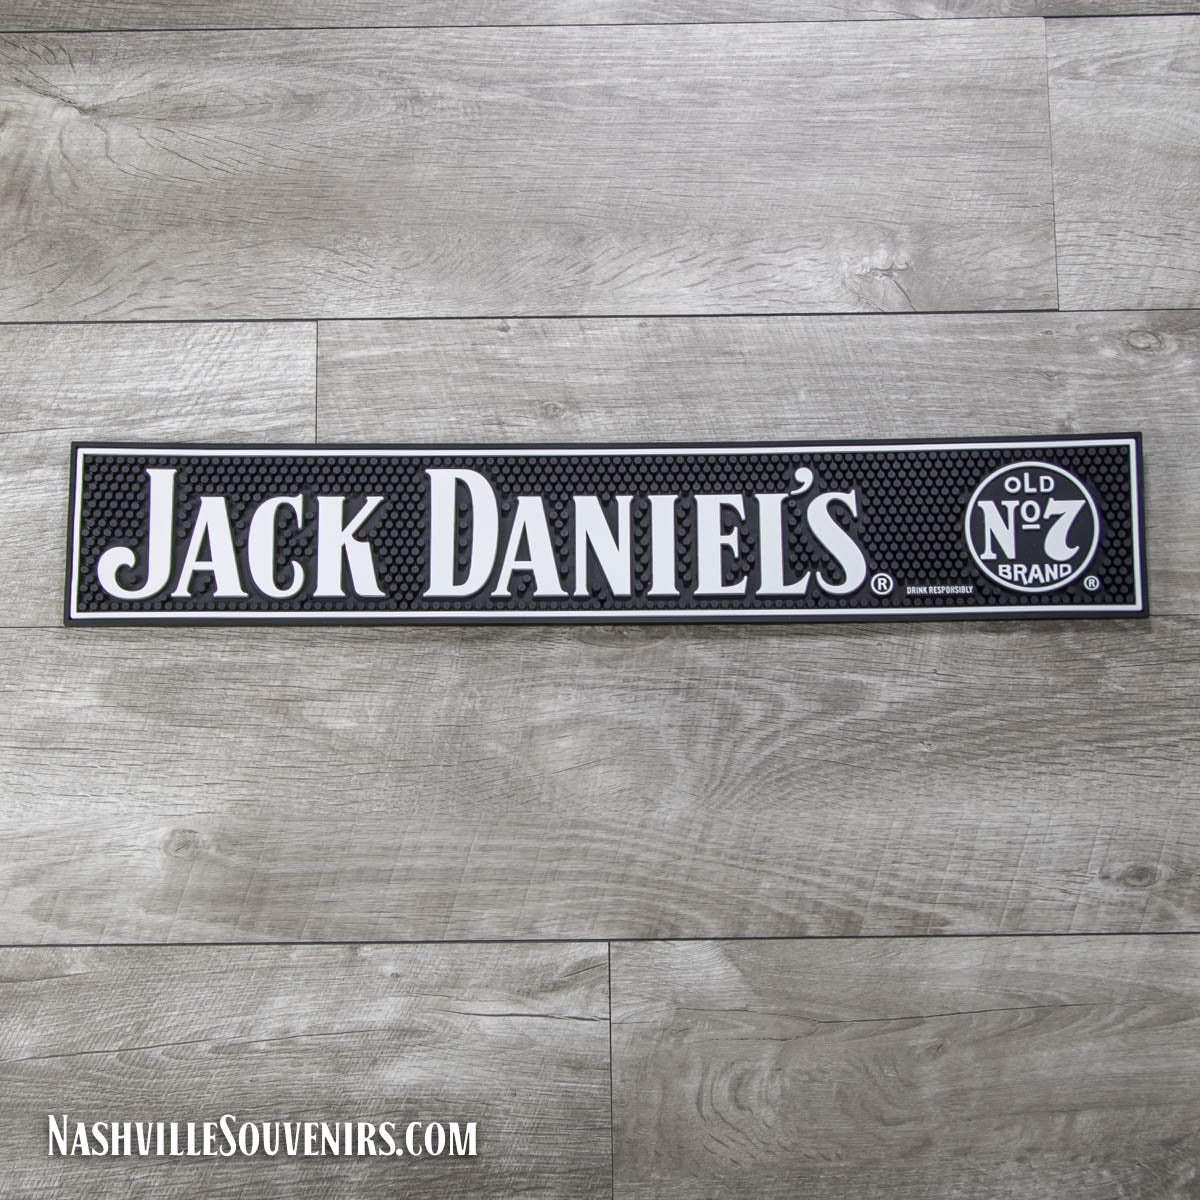 Dress up the home bar with this Jack Daniel's bar mat. This bar mat is one of those "must have" Jack Daniel's bar accessories. Not only is it functional but it's the perfect resting place for your great Tennessee whiskey while relaxing.